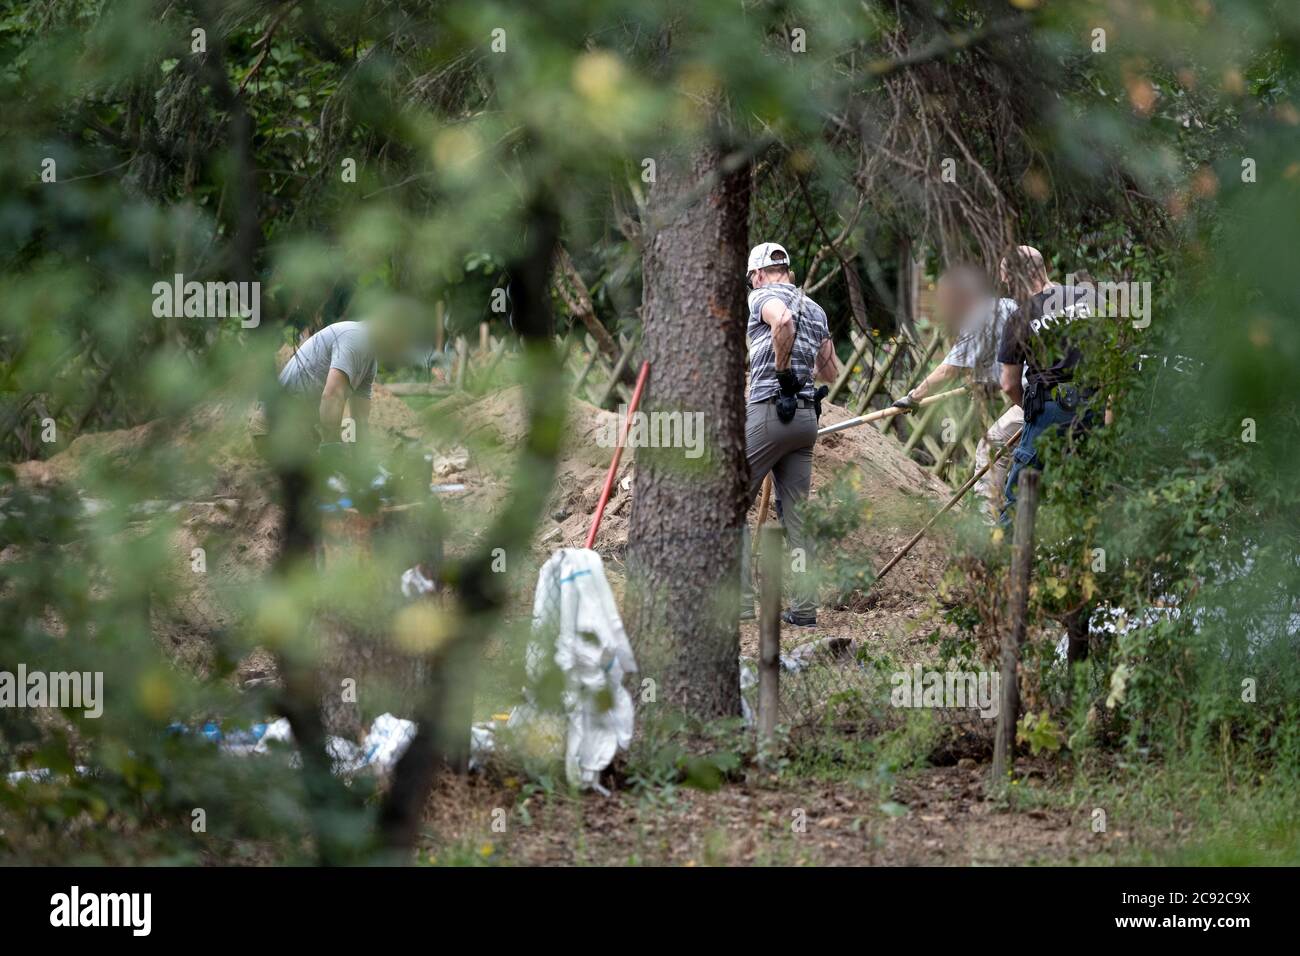 Seelze, Germany. 28th July, 2020. police officers search an area inside a garden as part of an investigation plan to find any clues about the disappearance of the British girl Madeleine McCann on 3 May 2007. Credit: Peter Steffen/dpa - ACHTUNG: Personen wurden aus rechtlichen Gründen gepixelt/dpa/Alamy Live News Stock Photo